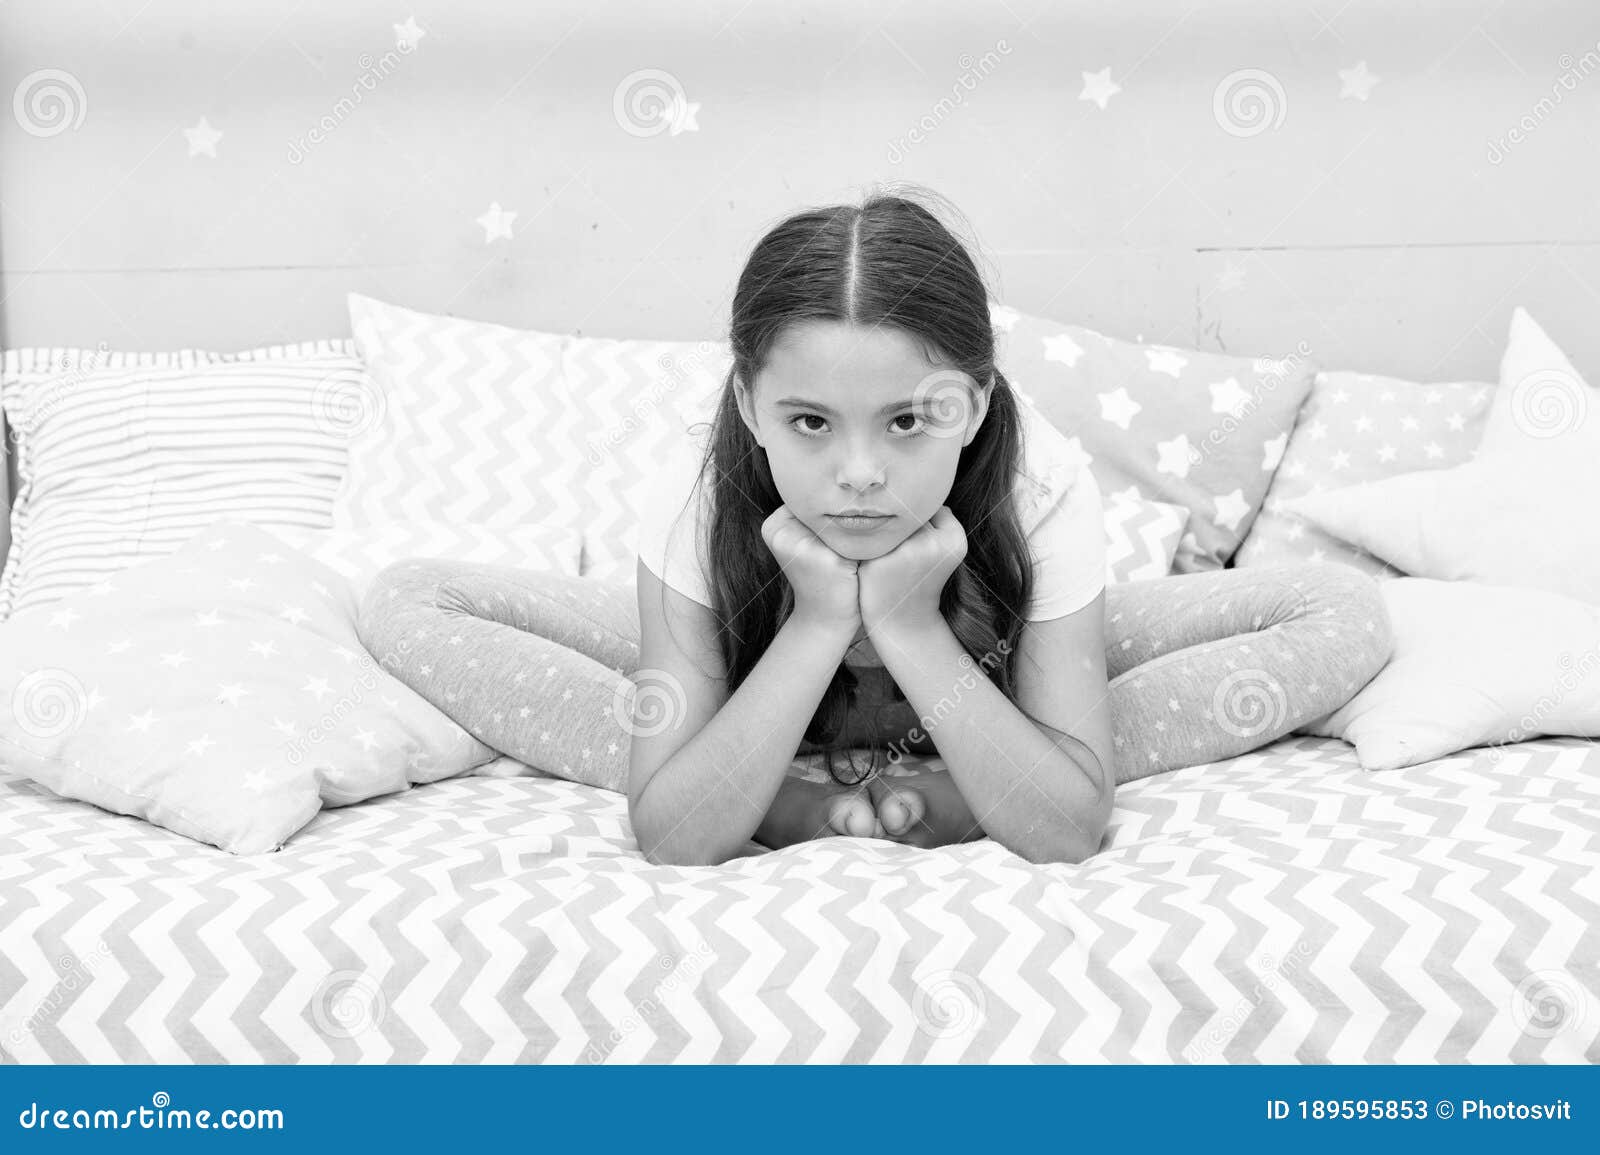 Why so Sad. Sad Girl Sit in Bed. Little Child with Sad Look. Bedtime ...